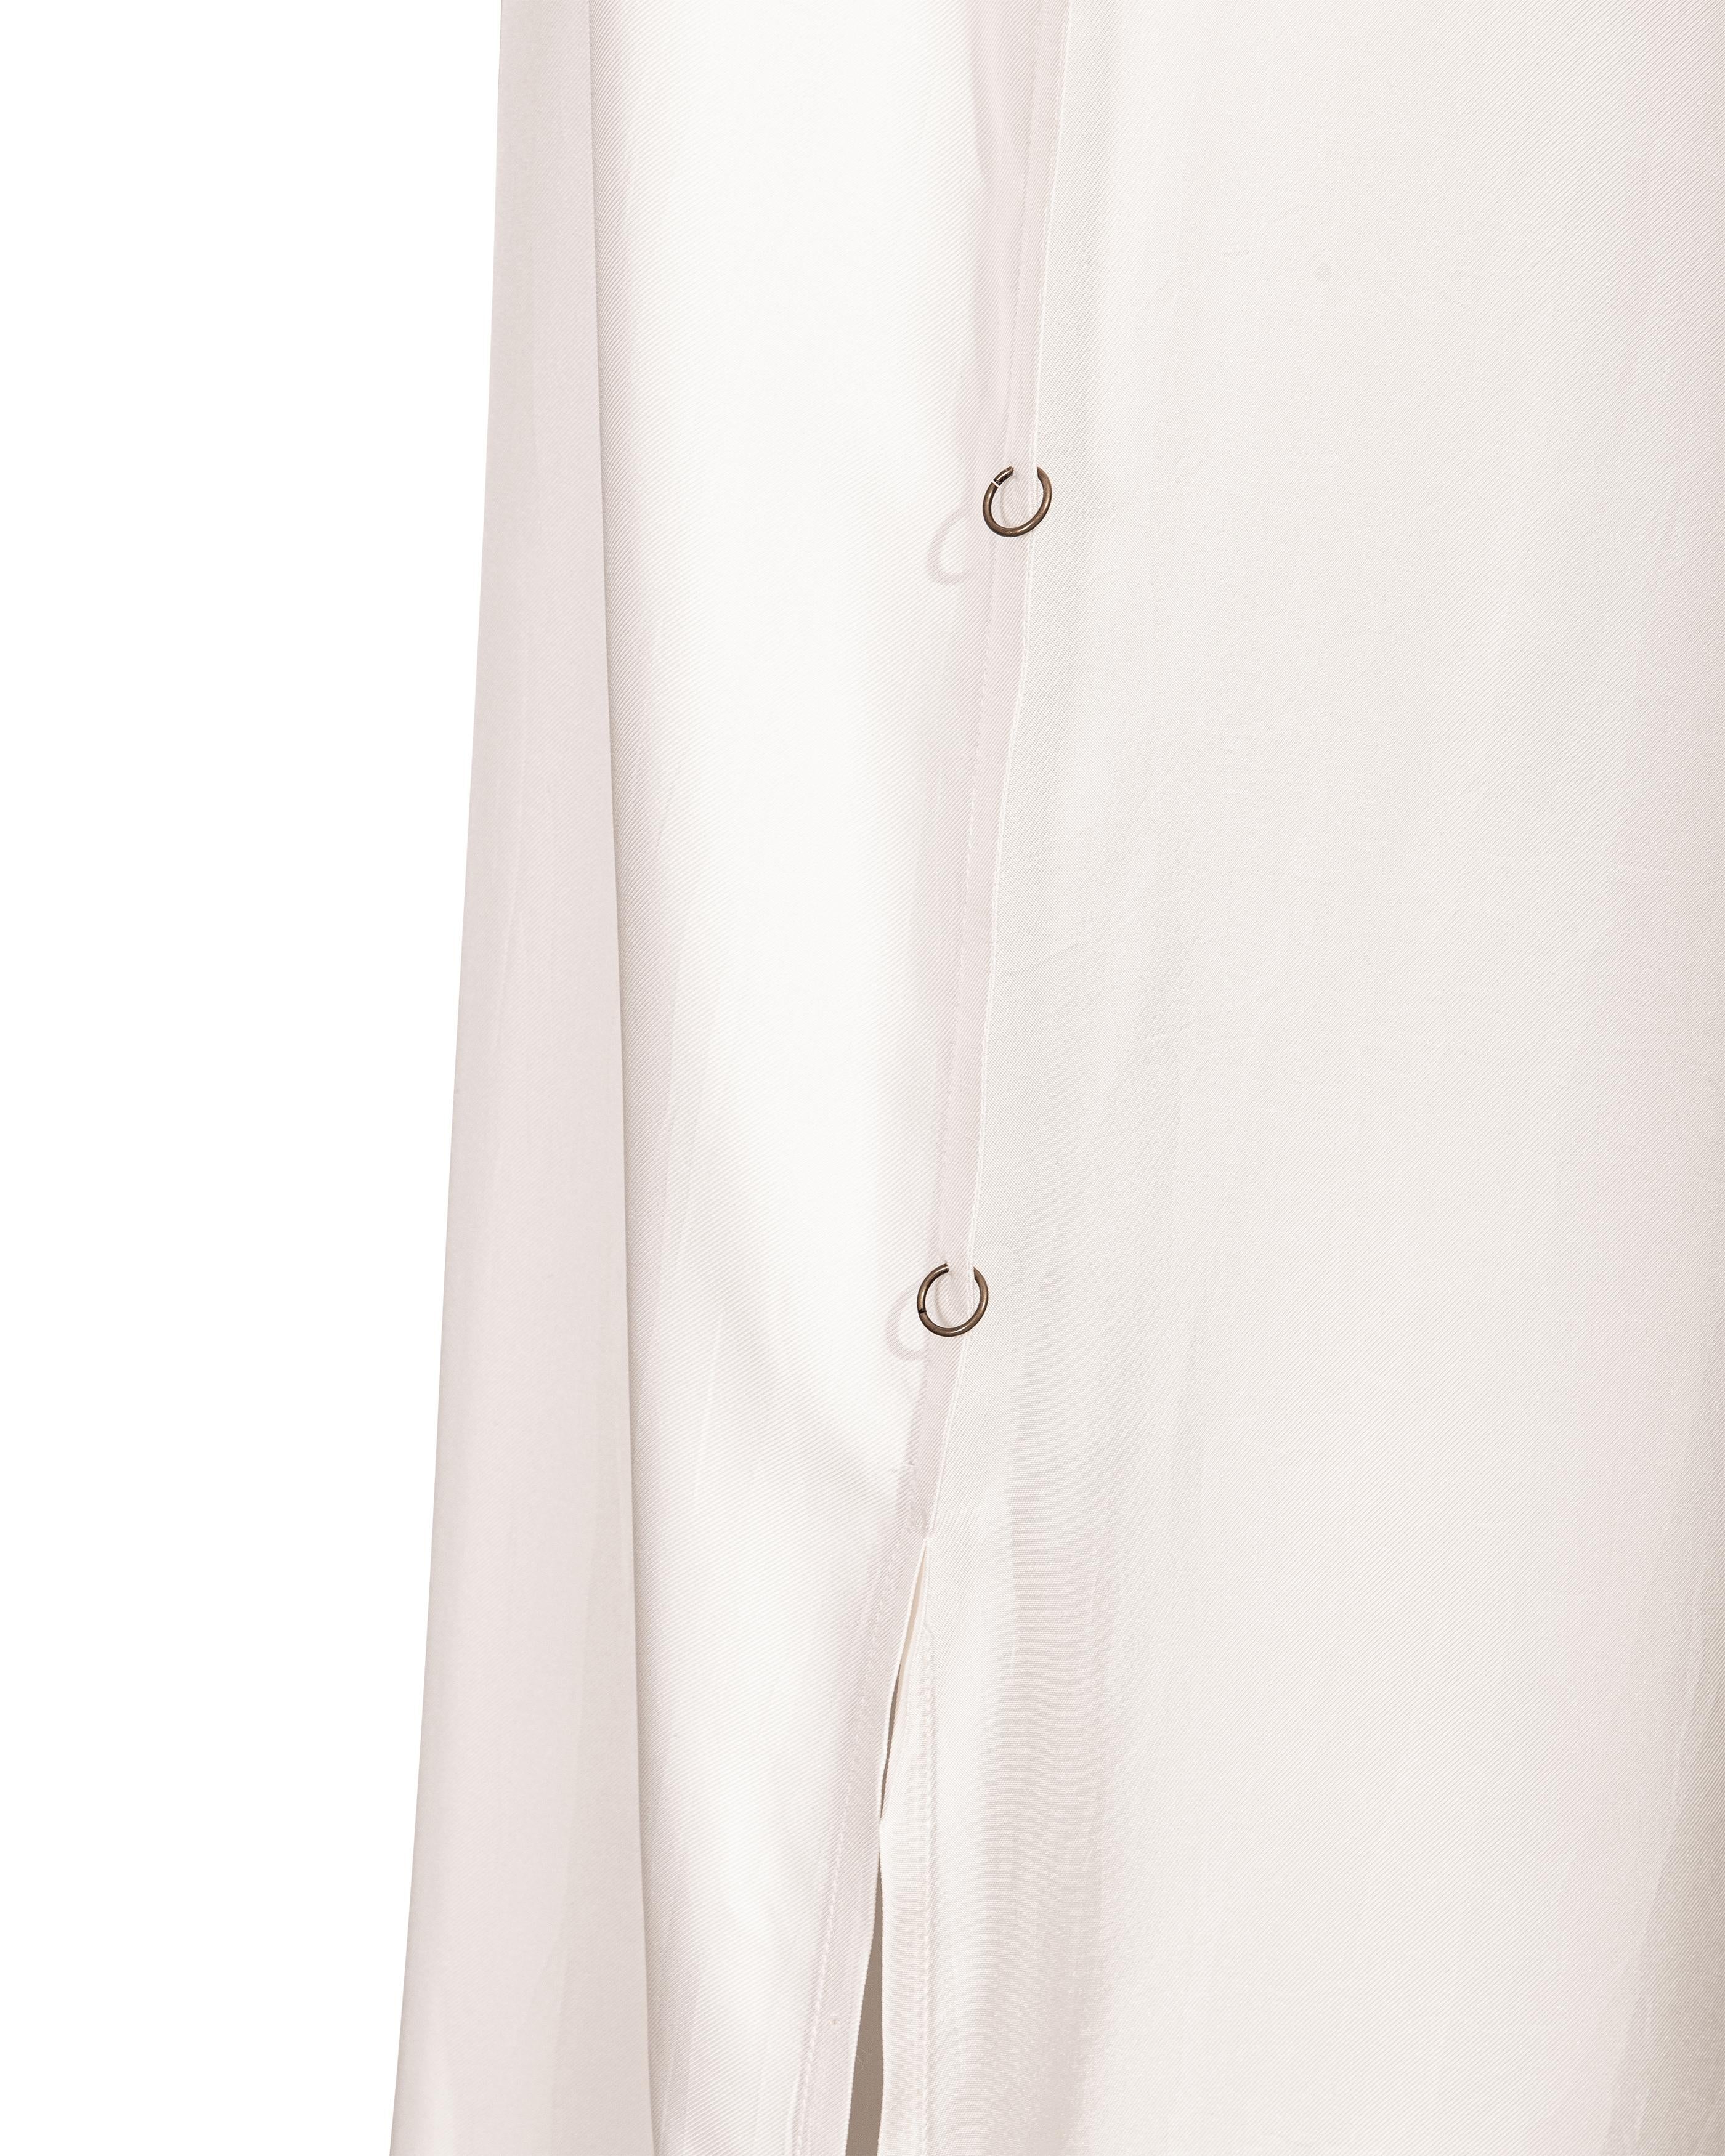 Women's S/S 2016 Calvin Klein White Silk Gown with Bronze Loop Side Details For Sale